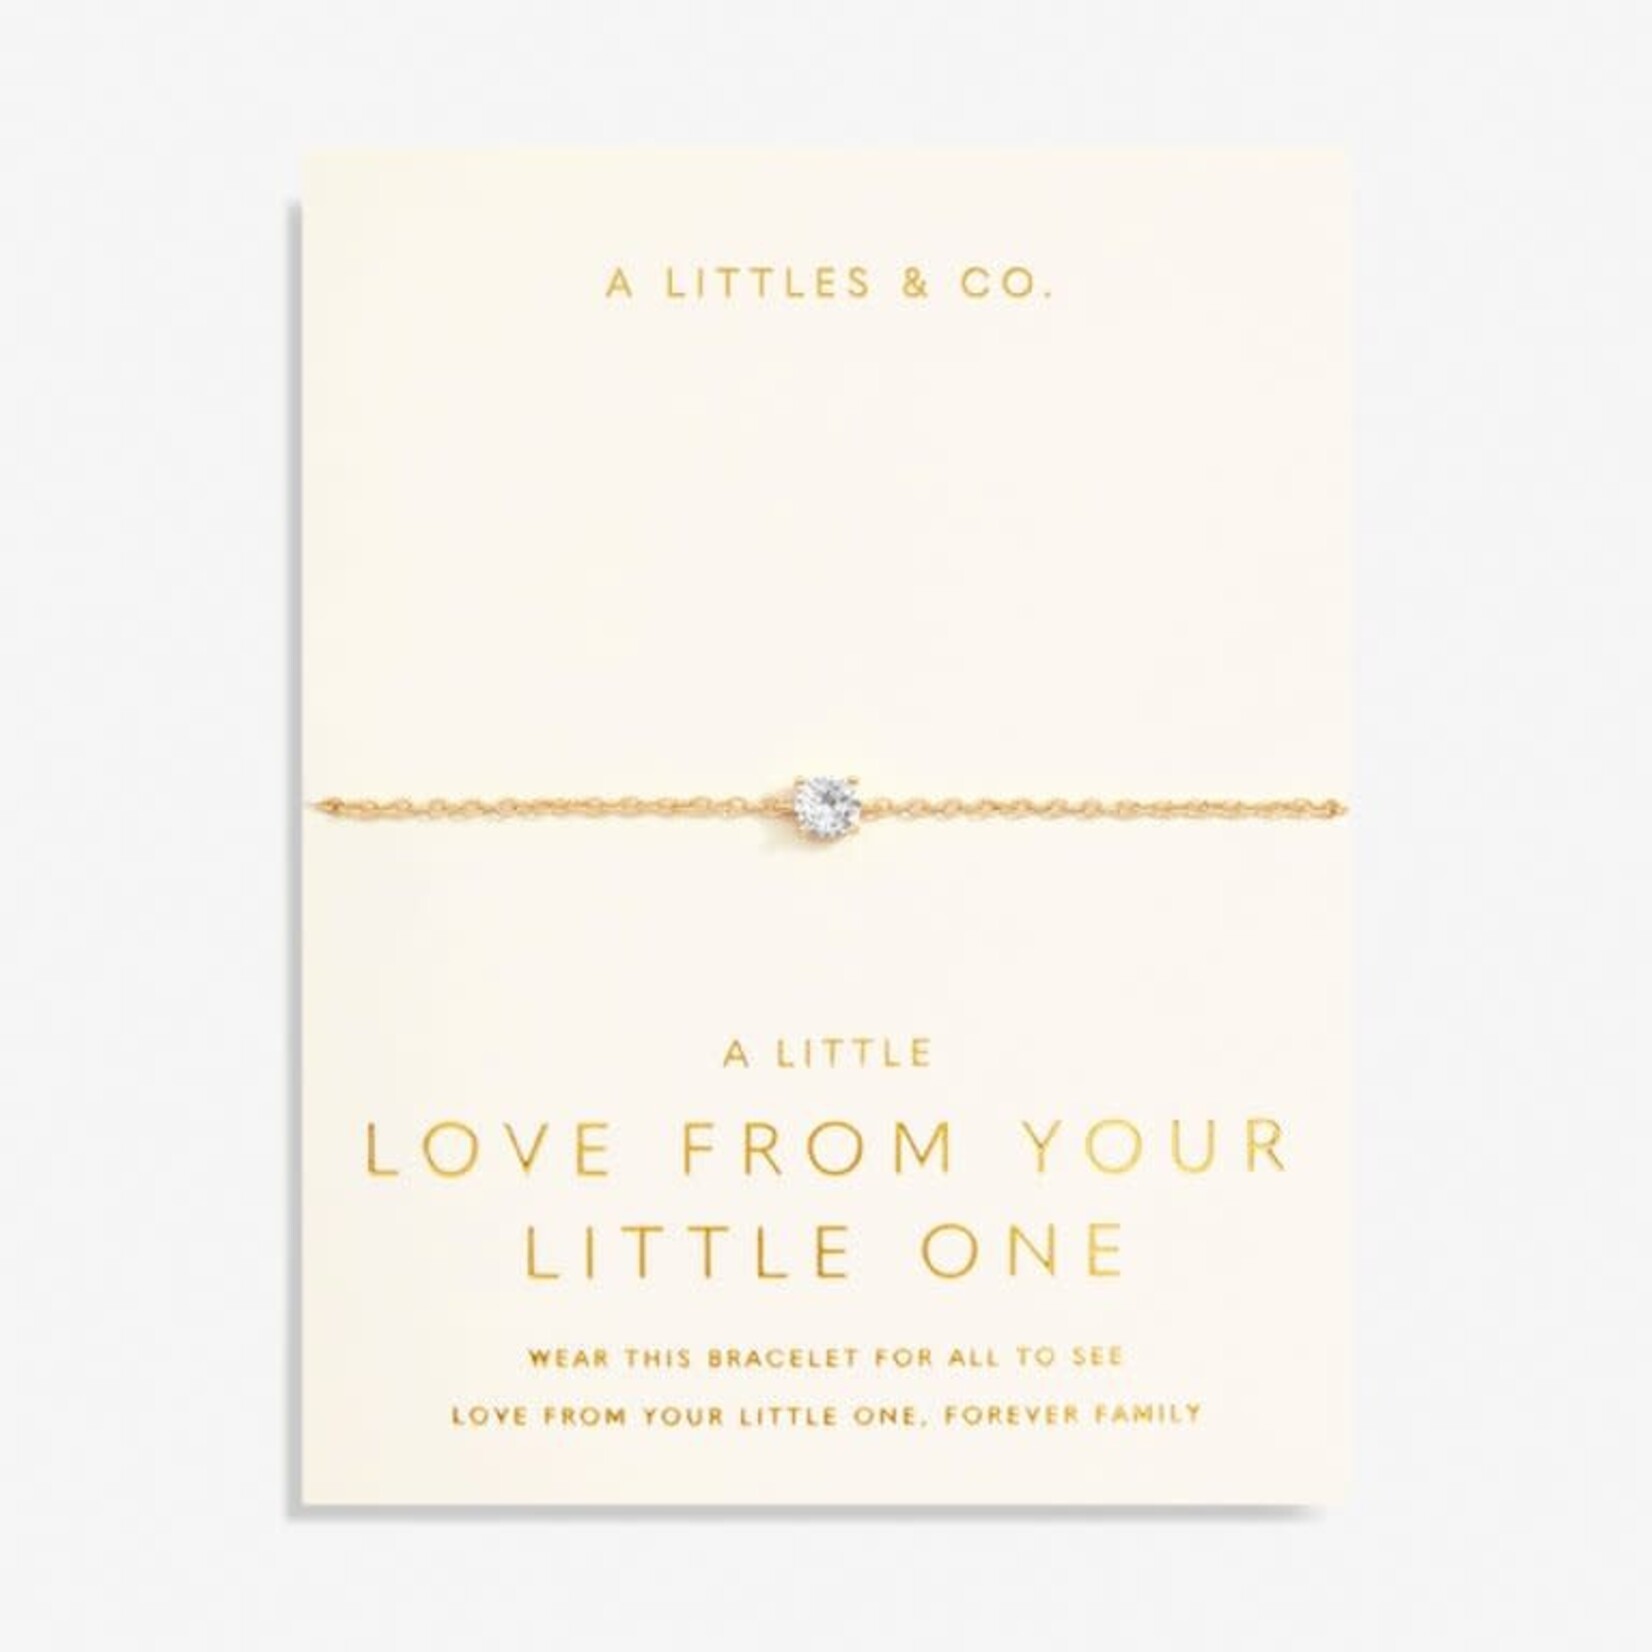 A LITTLES & CO A LITTLE LOVE FROM YOUR LITTLE ONES